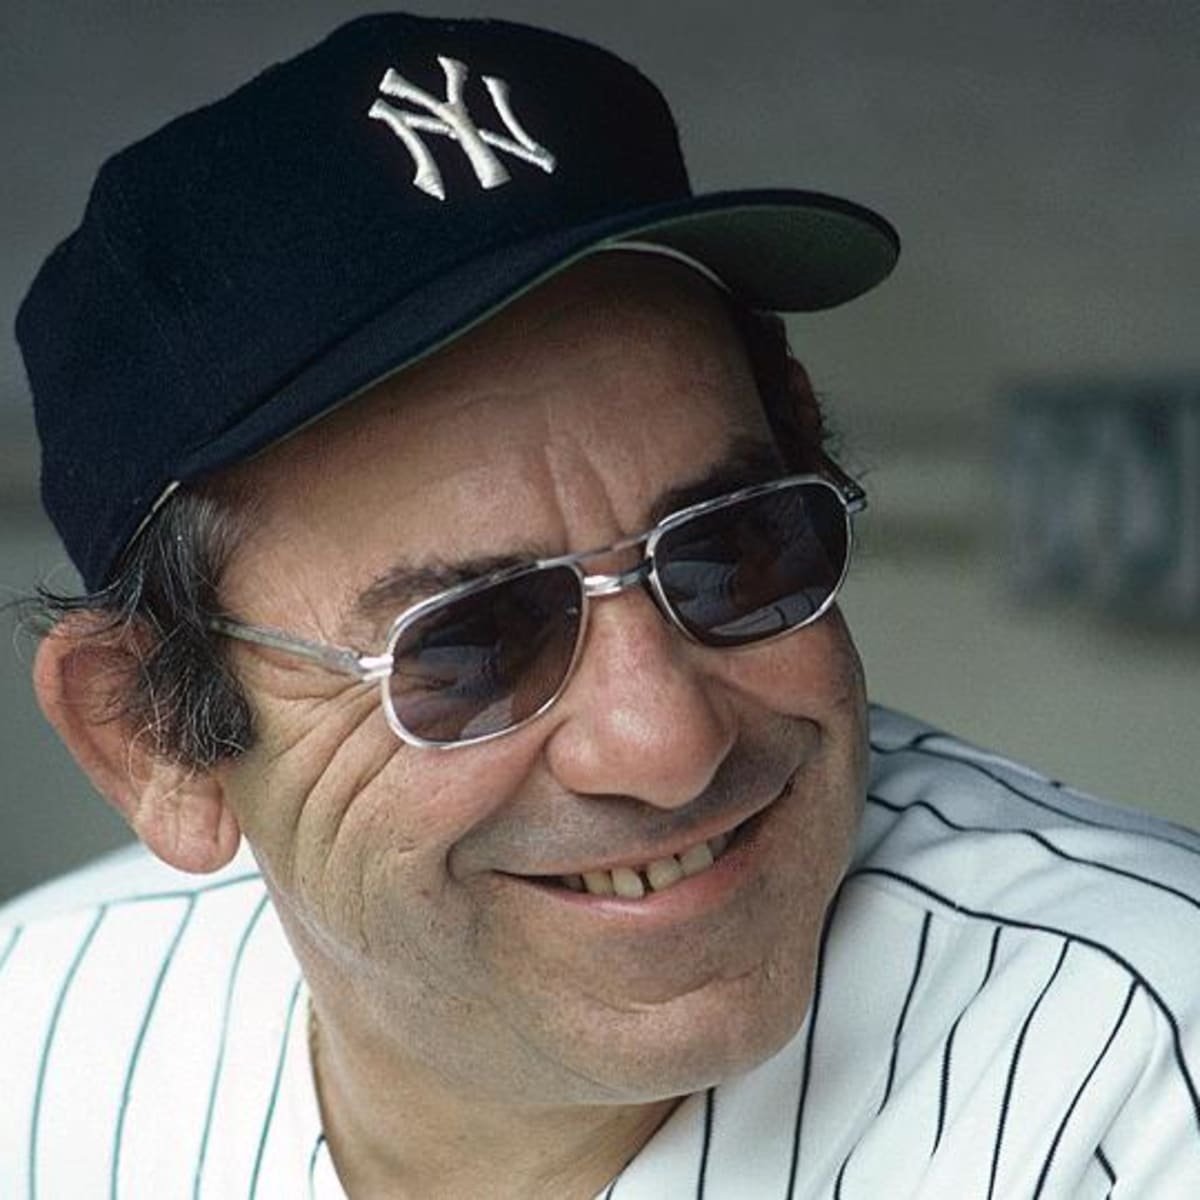 Our View: Why Yogi Berra touched our hearts